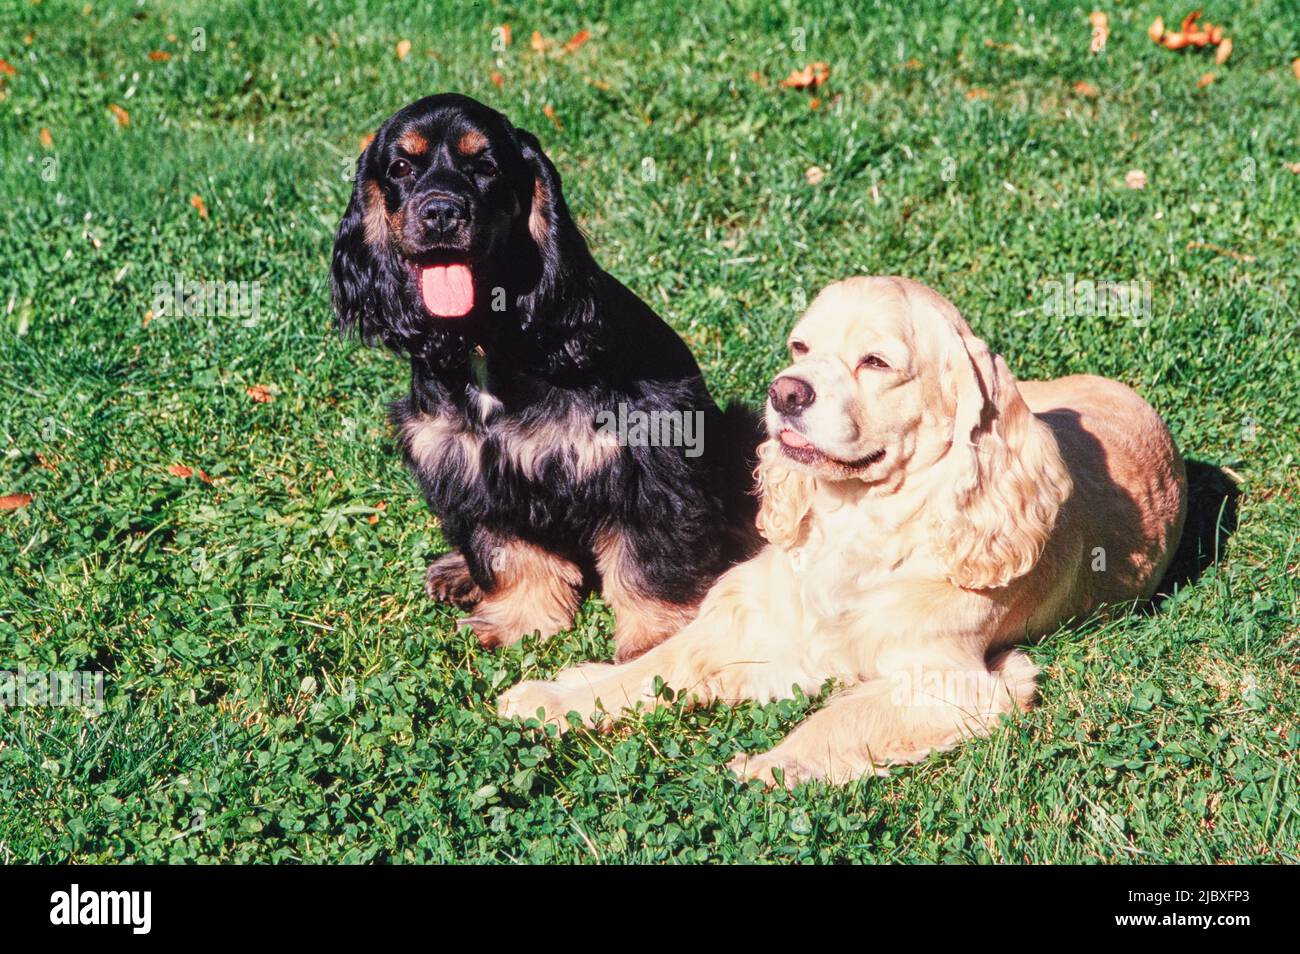 Two American Cocker Spaniels sitting in grass and clover Stock Photo